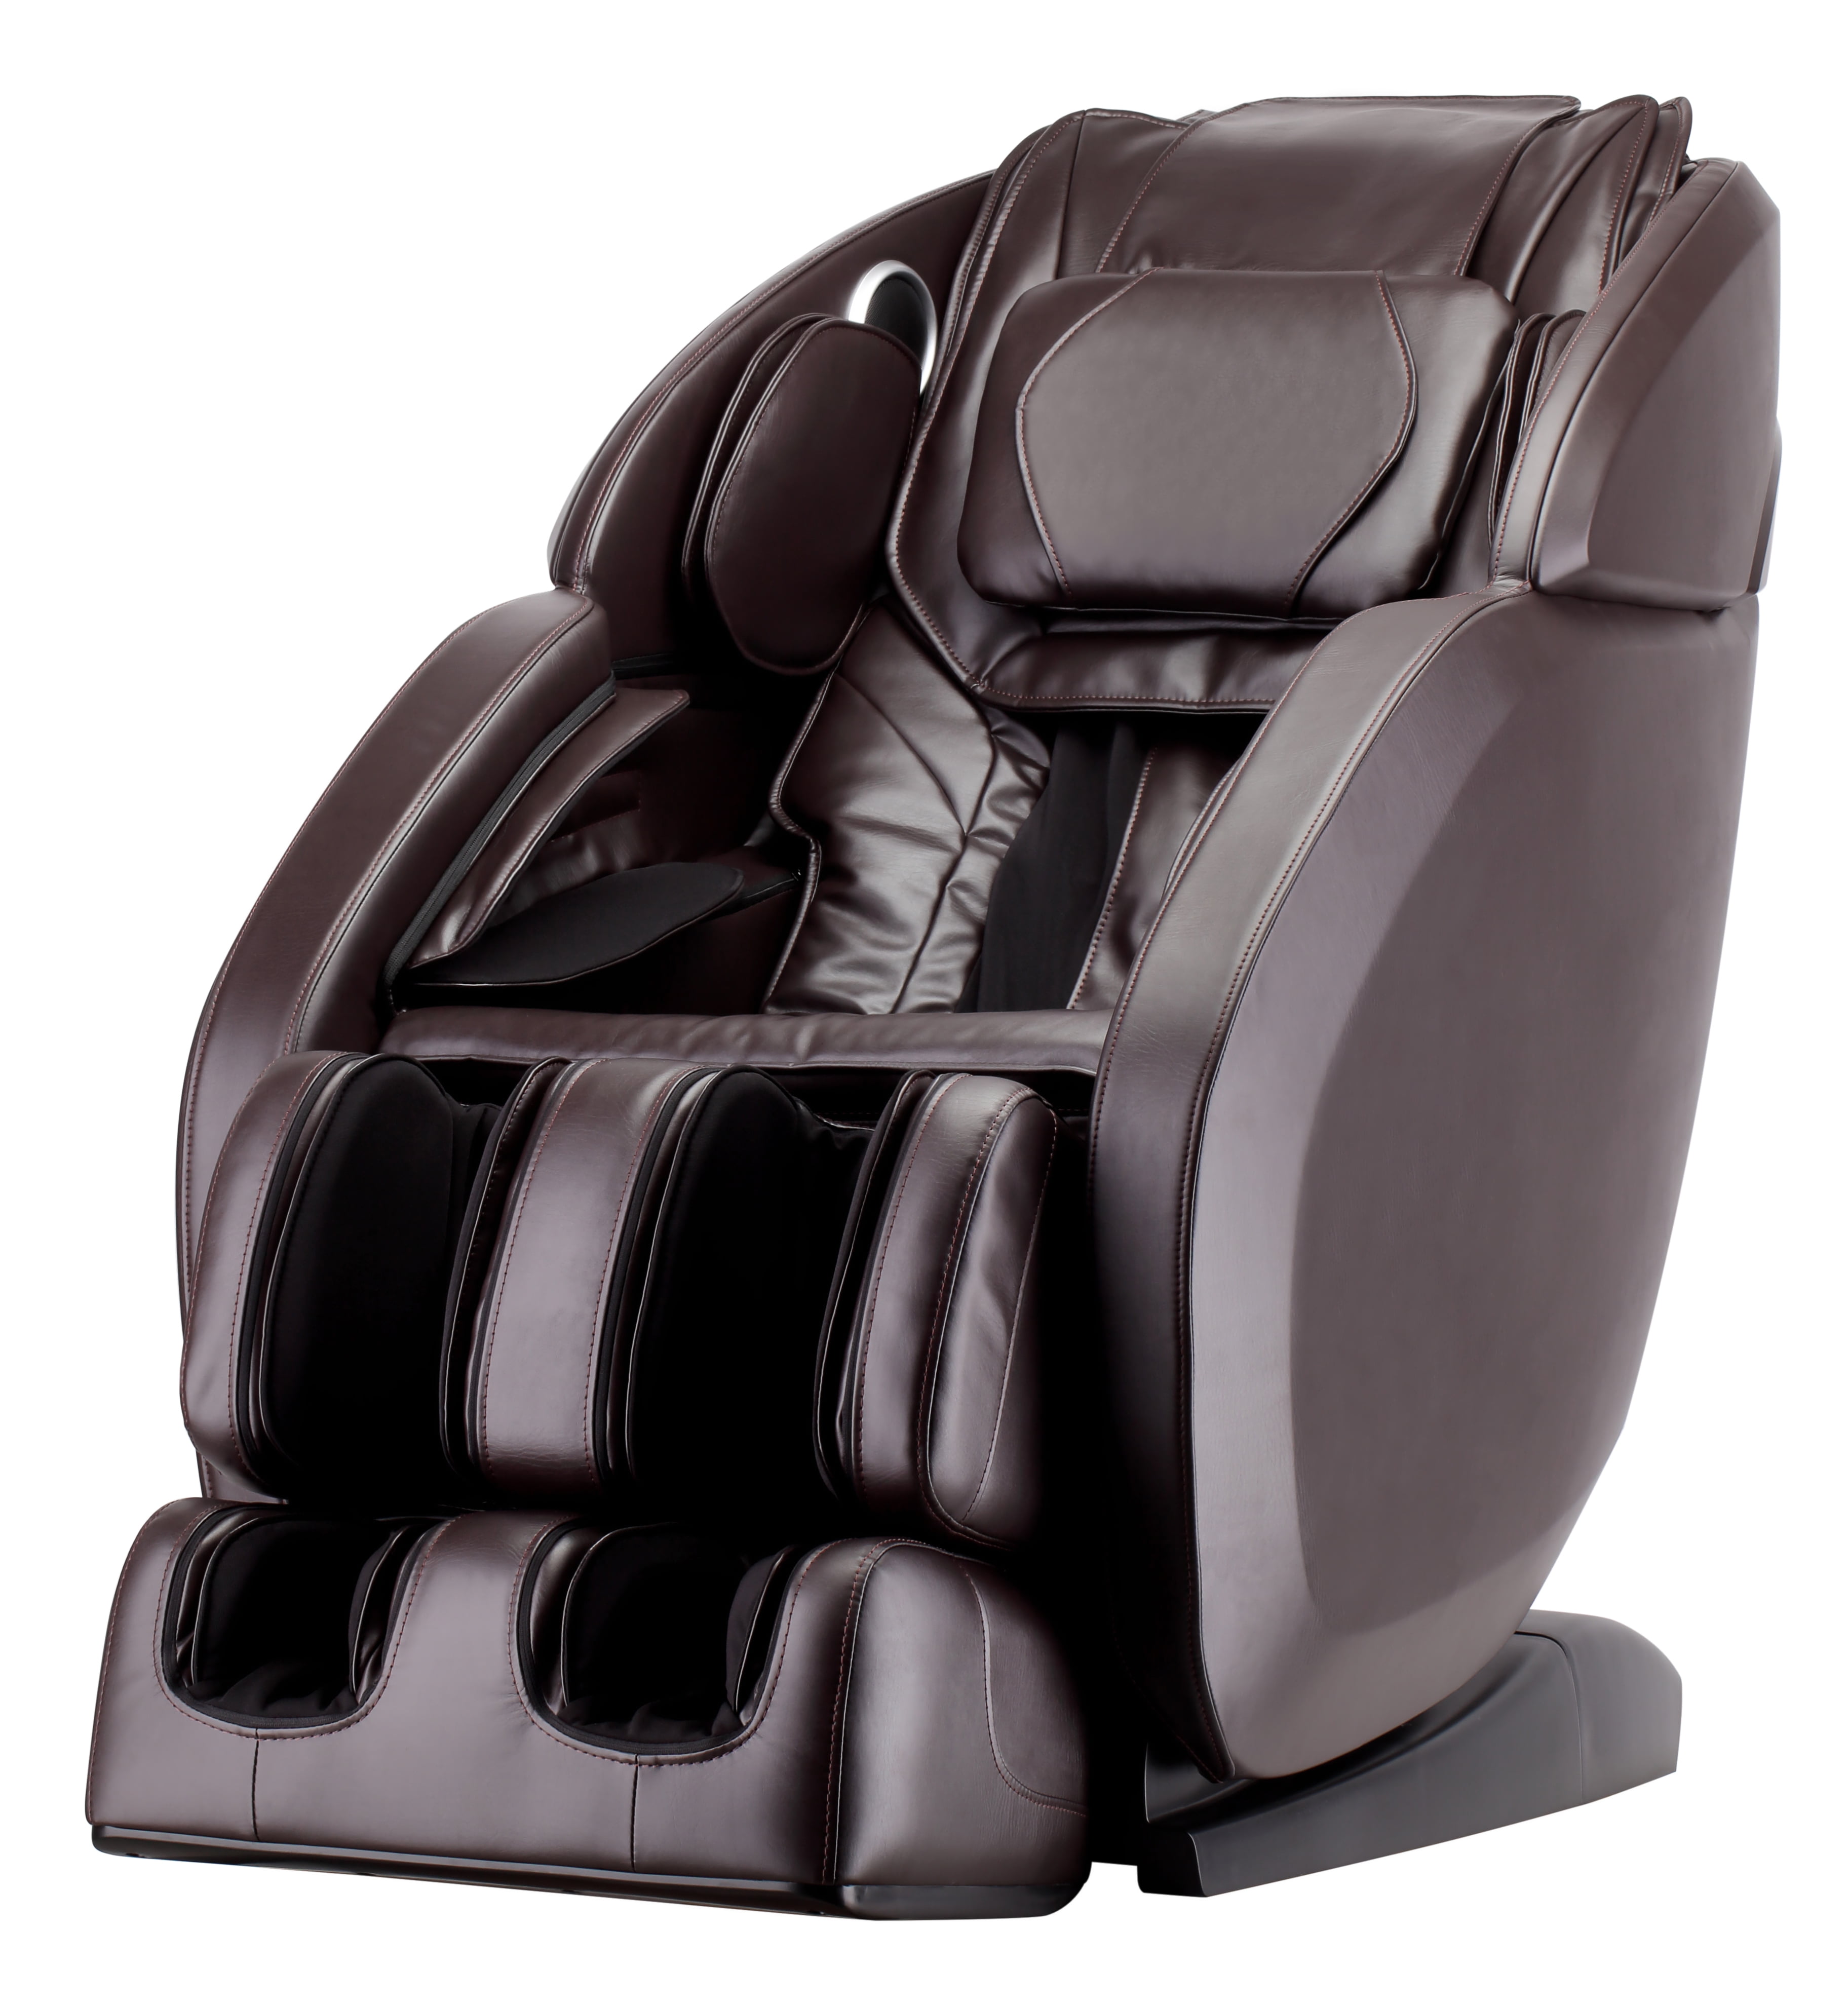 Lifesmart Large R8662 Massage and Wellness Chair with Therapy